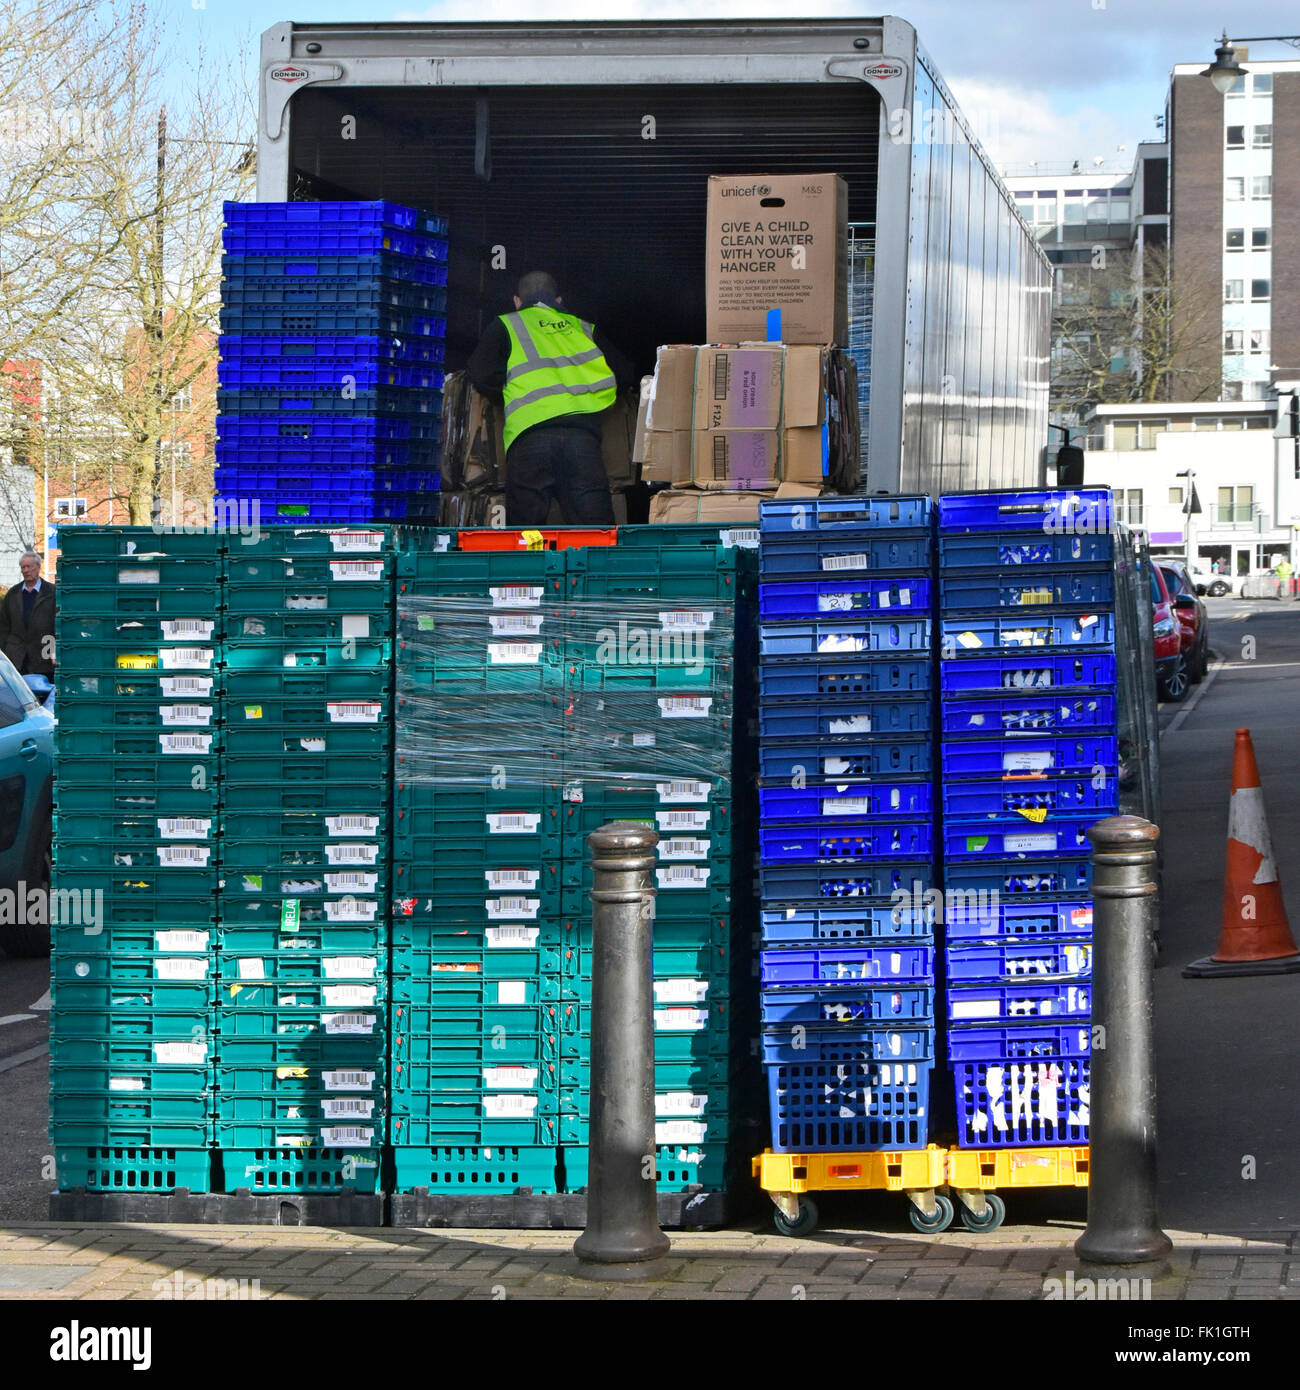 Supply chain completed articulated M&S lorry with driver unloading new delivery of merchandise to rear of high street store Brentwood Essex England UK Stock Photo